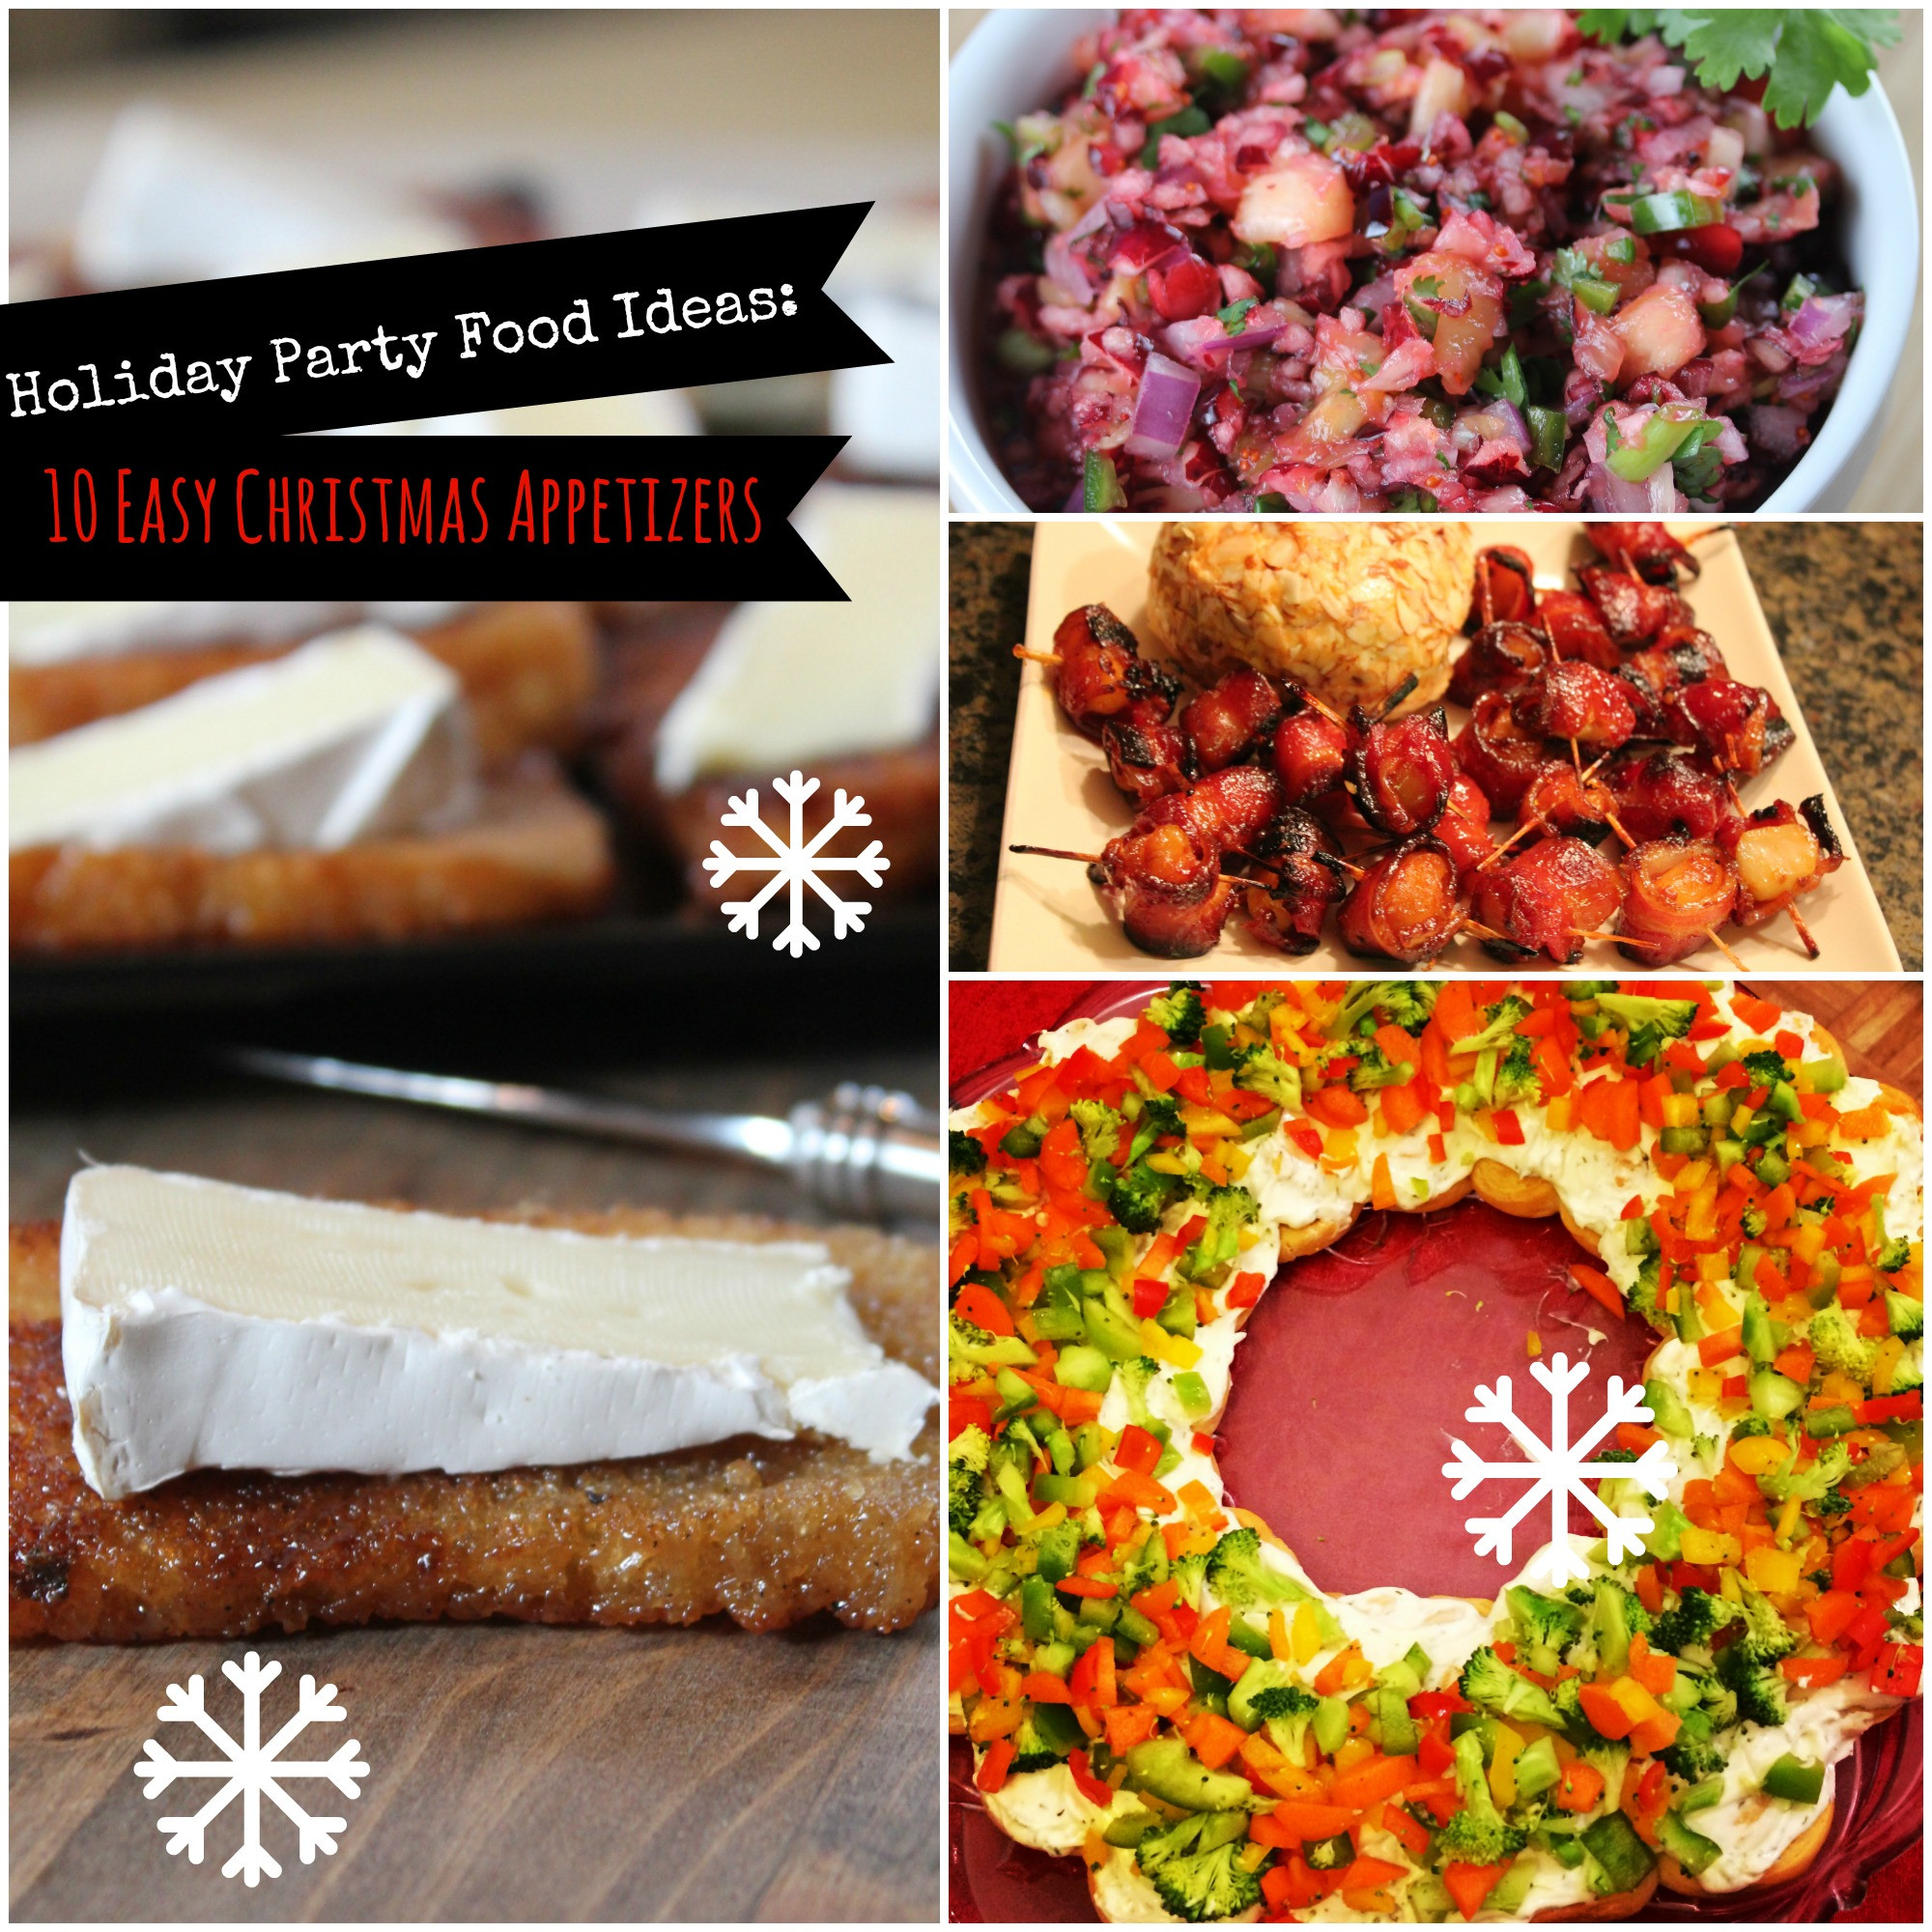 Food Ideas For Christmas Party
 Holiday Party Food Ideas 10 Easy Christmas Appetizers